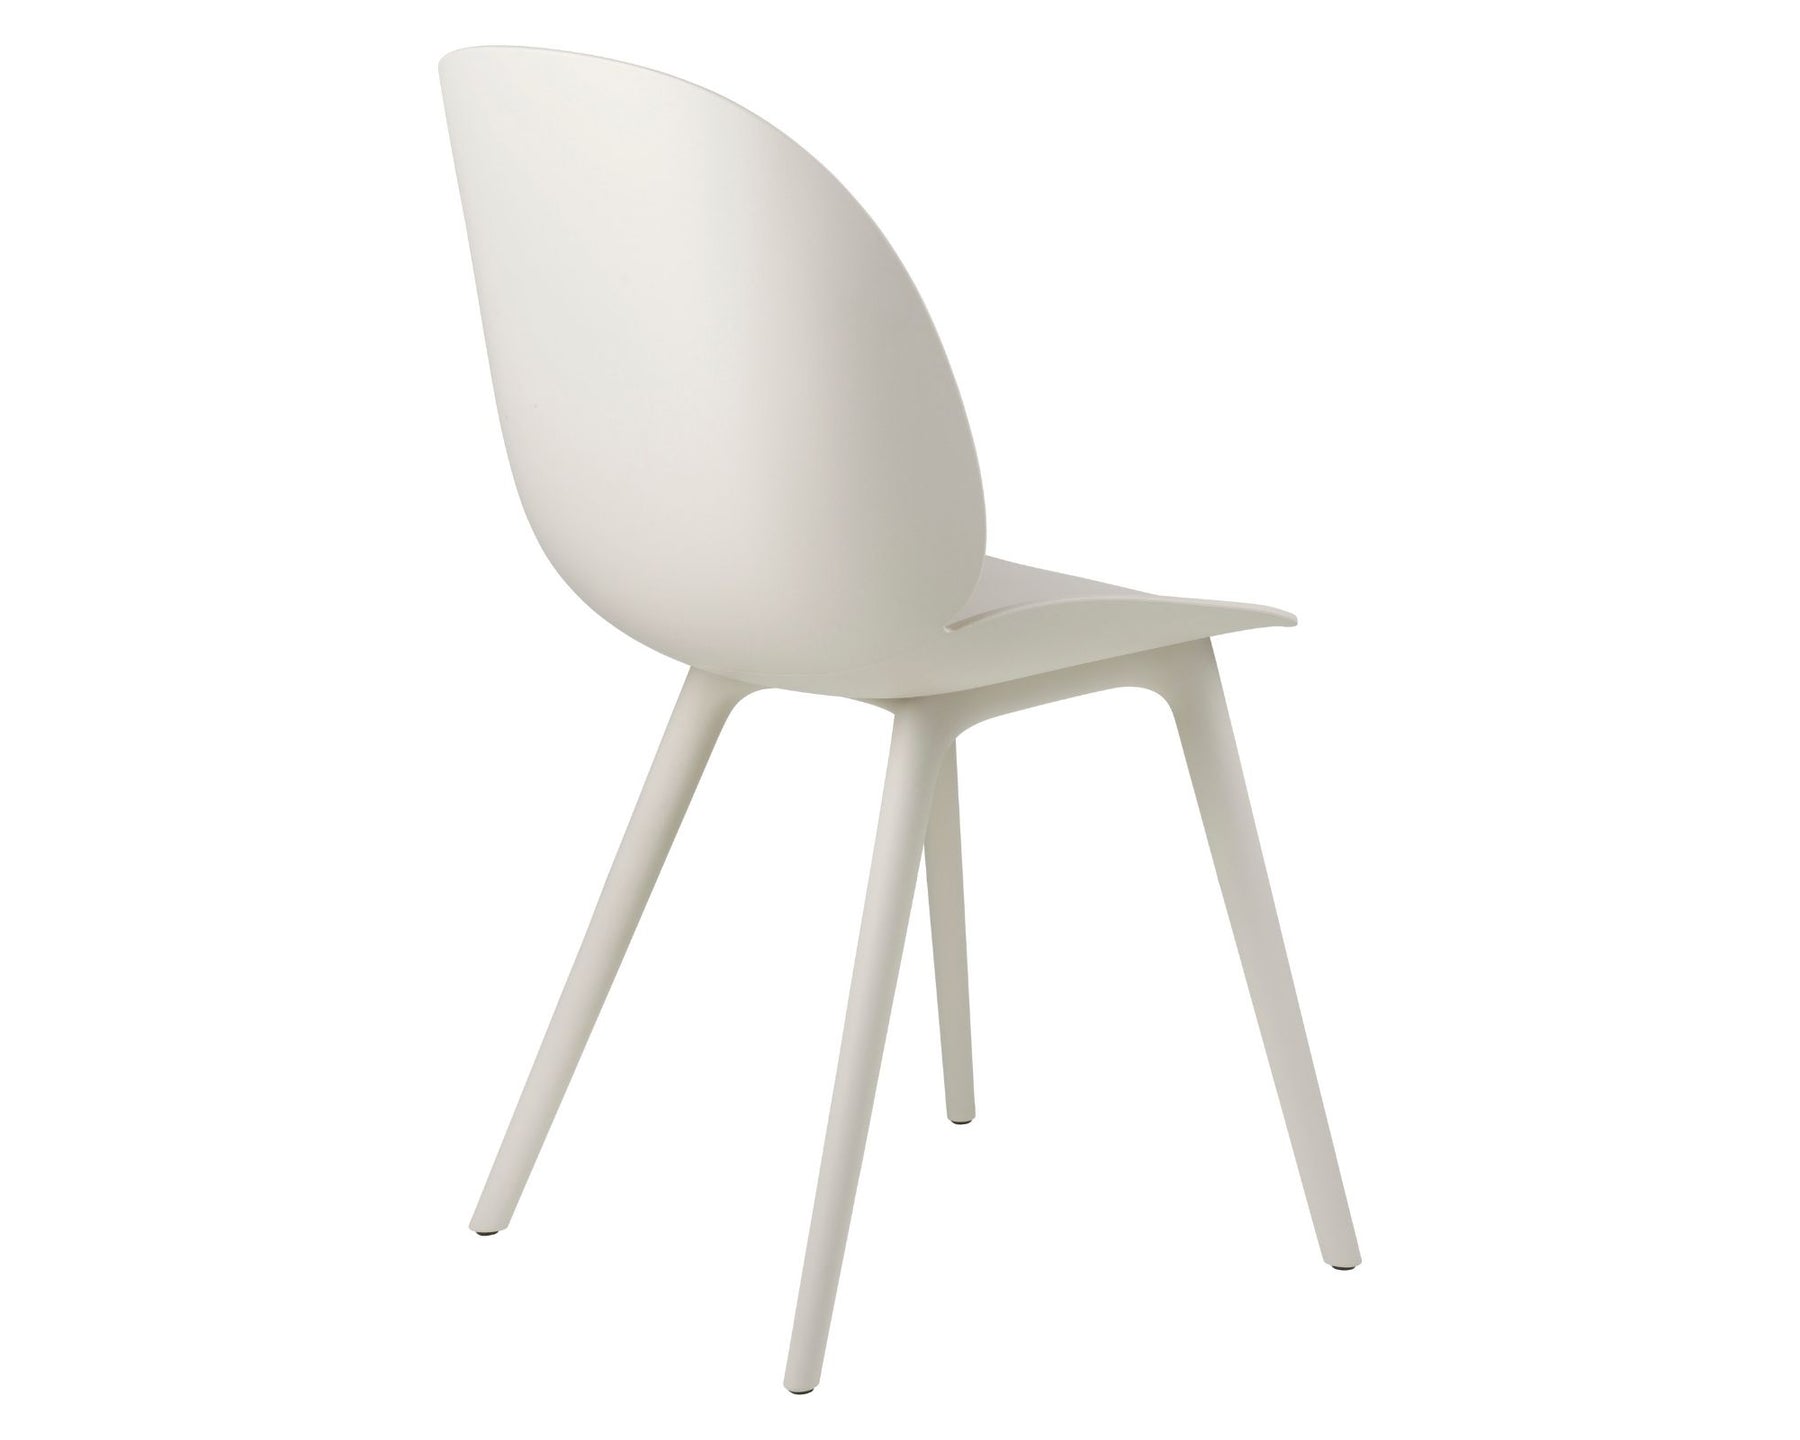 Beetle Outdoor Dining Chair - Plastic Base